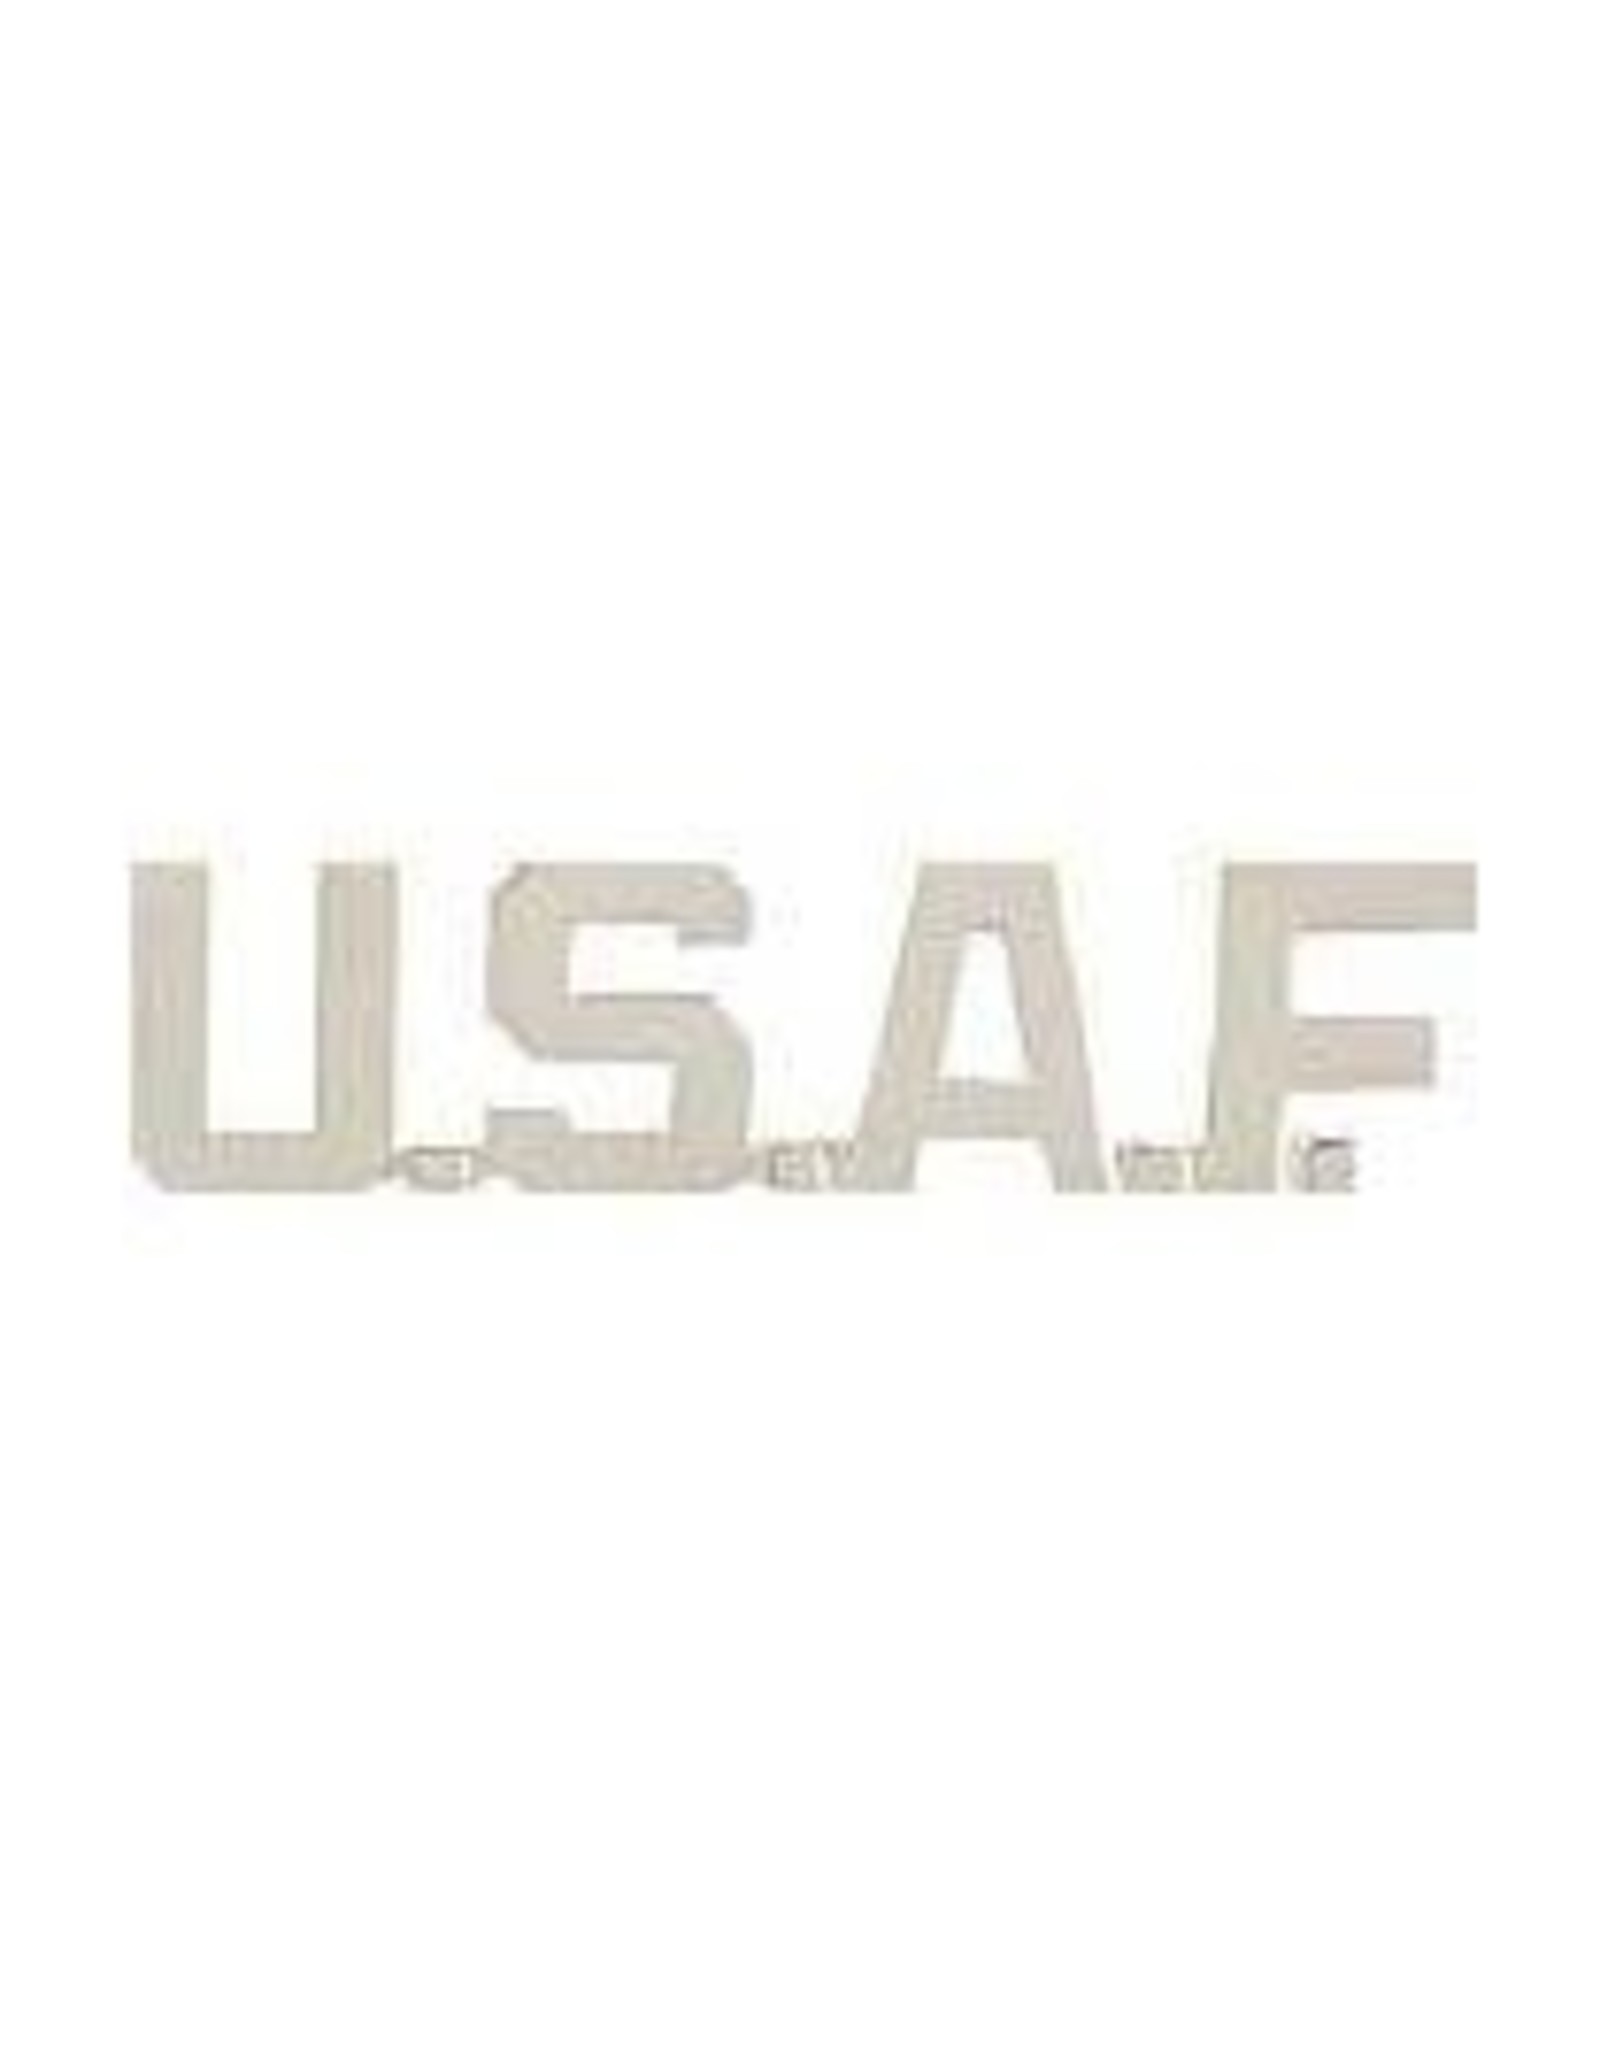 Pin - USAF Scroll Letters Silver